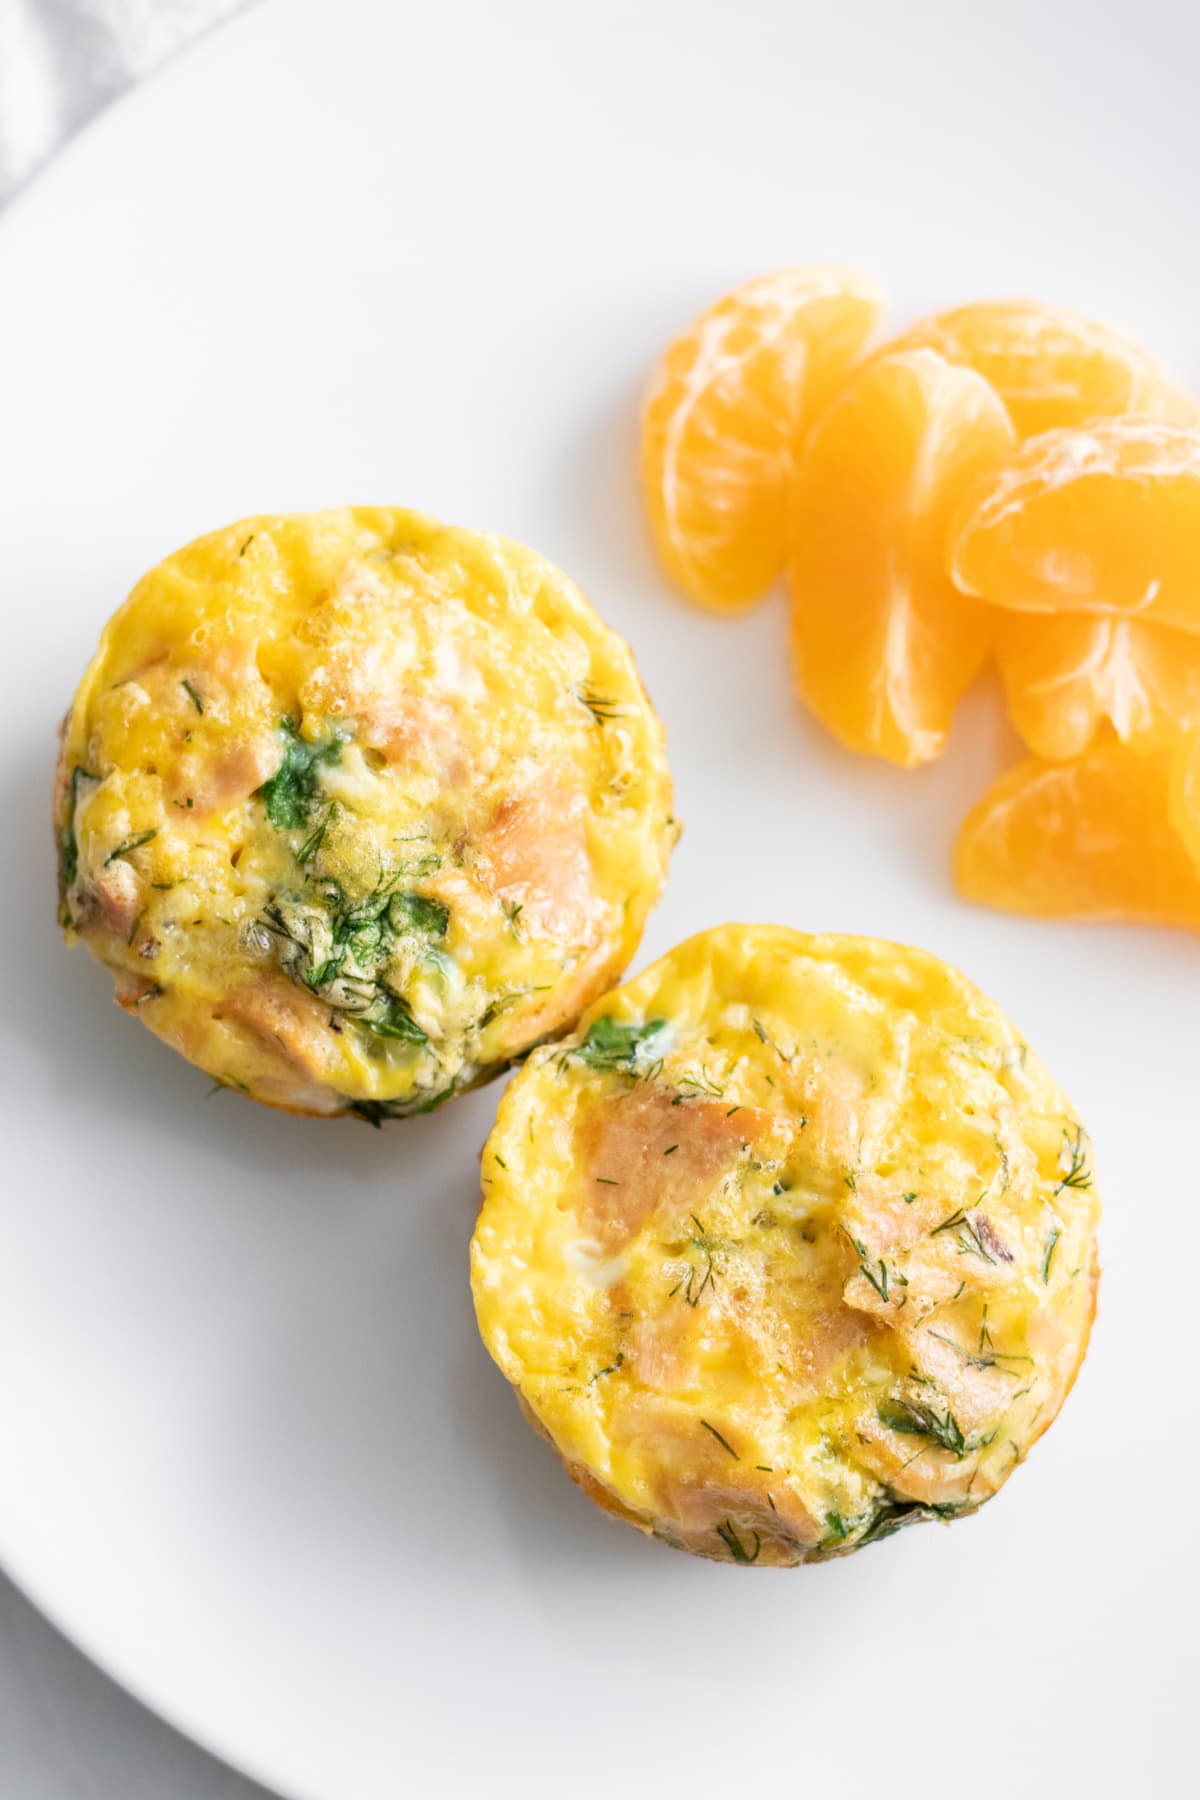 Two egg muffins on a plate with mandarin orange segments